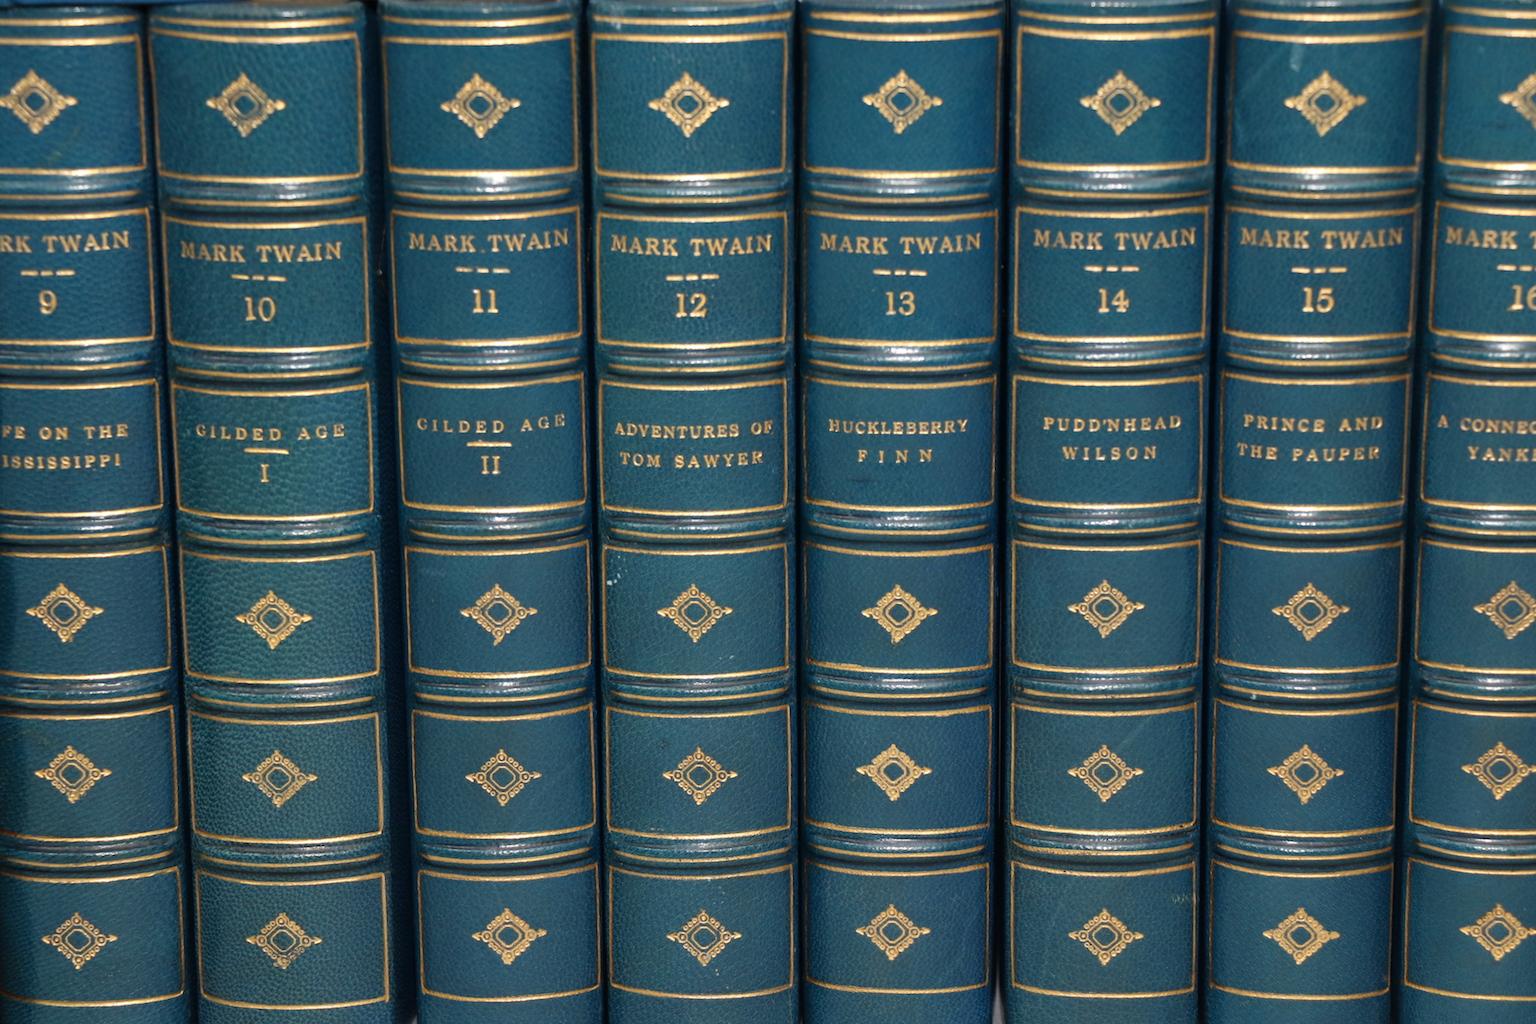 Dyed Books, The Complete Writings of Mark Twain